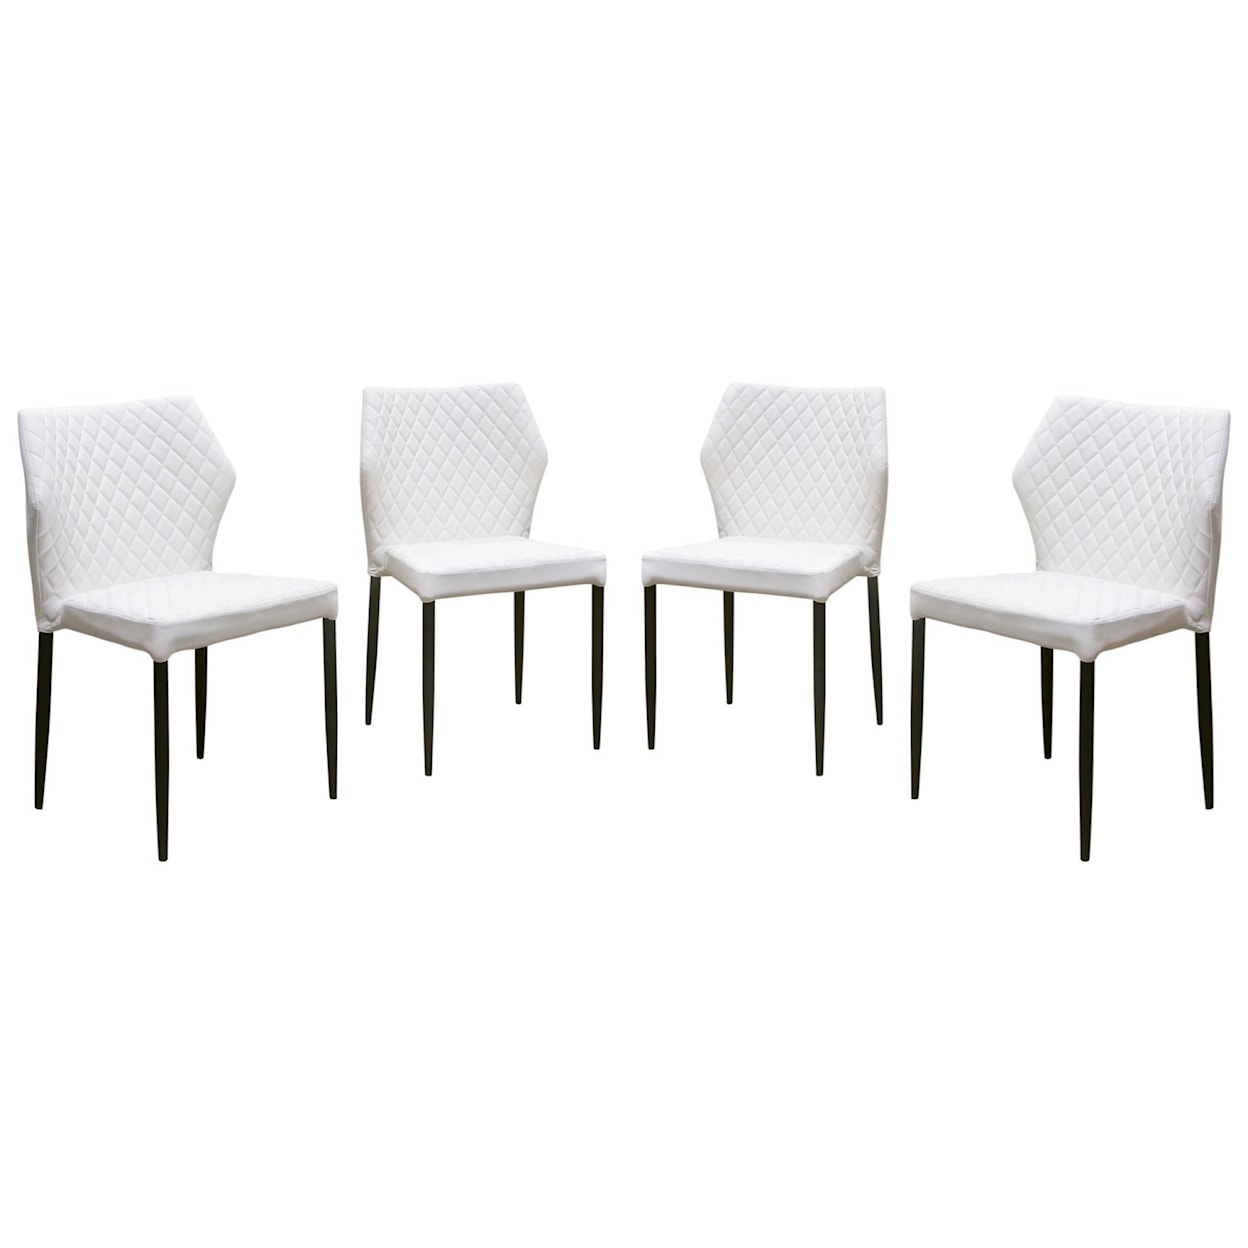 Diamond Sofa Furniture Milo Four Pack of Dining Chairs